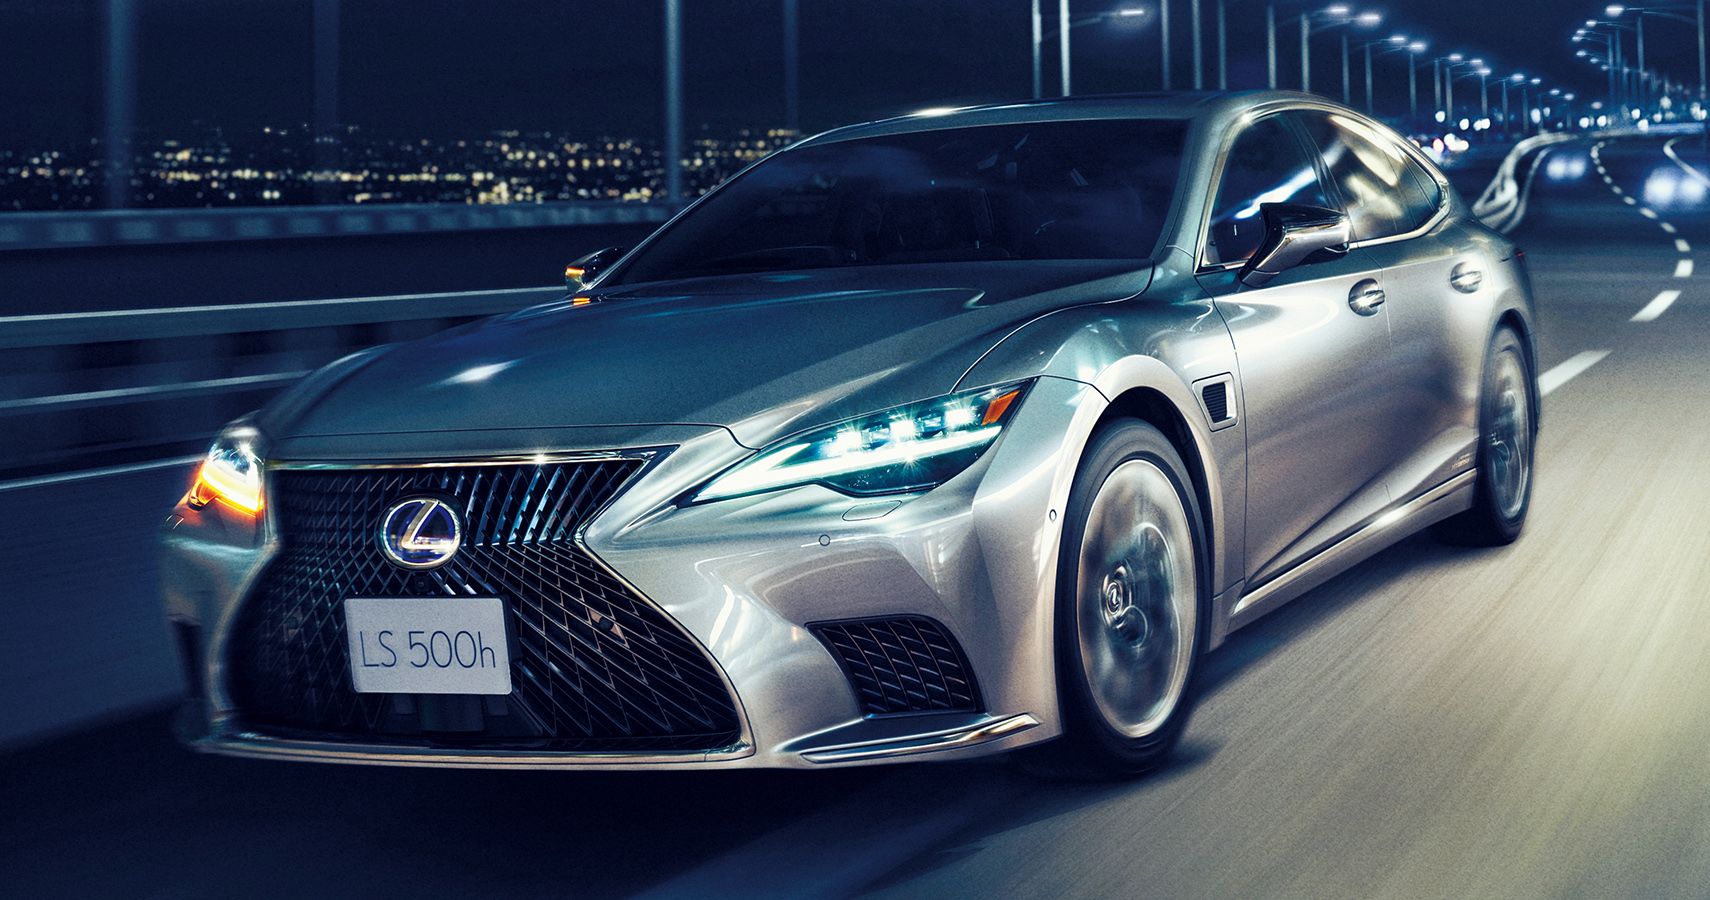 2021 Lexus LS Mixes Polished Looks With Enhanced Comfort And Tech